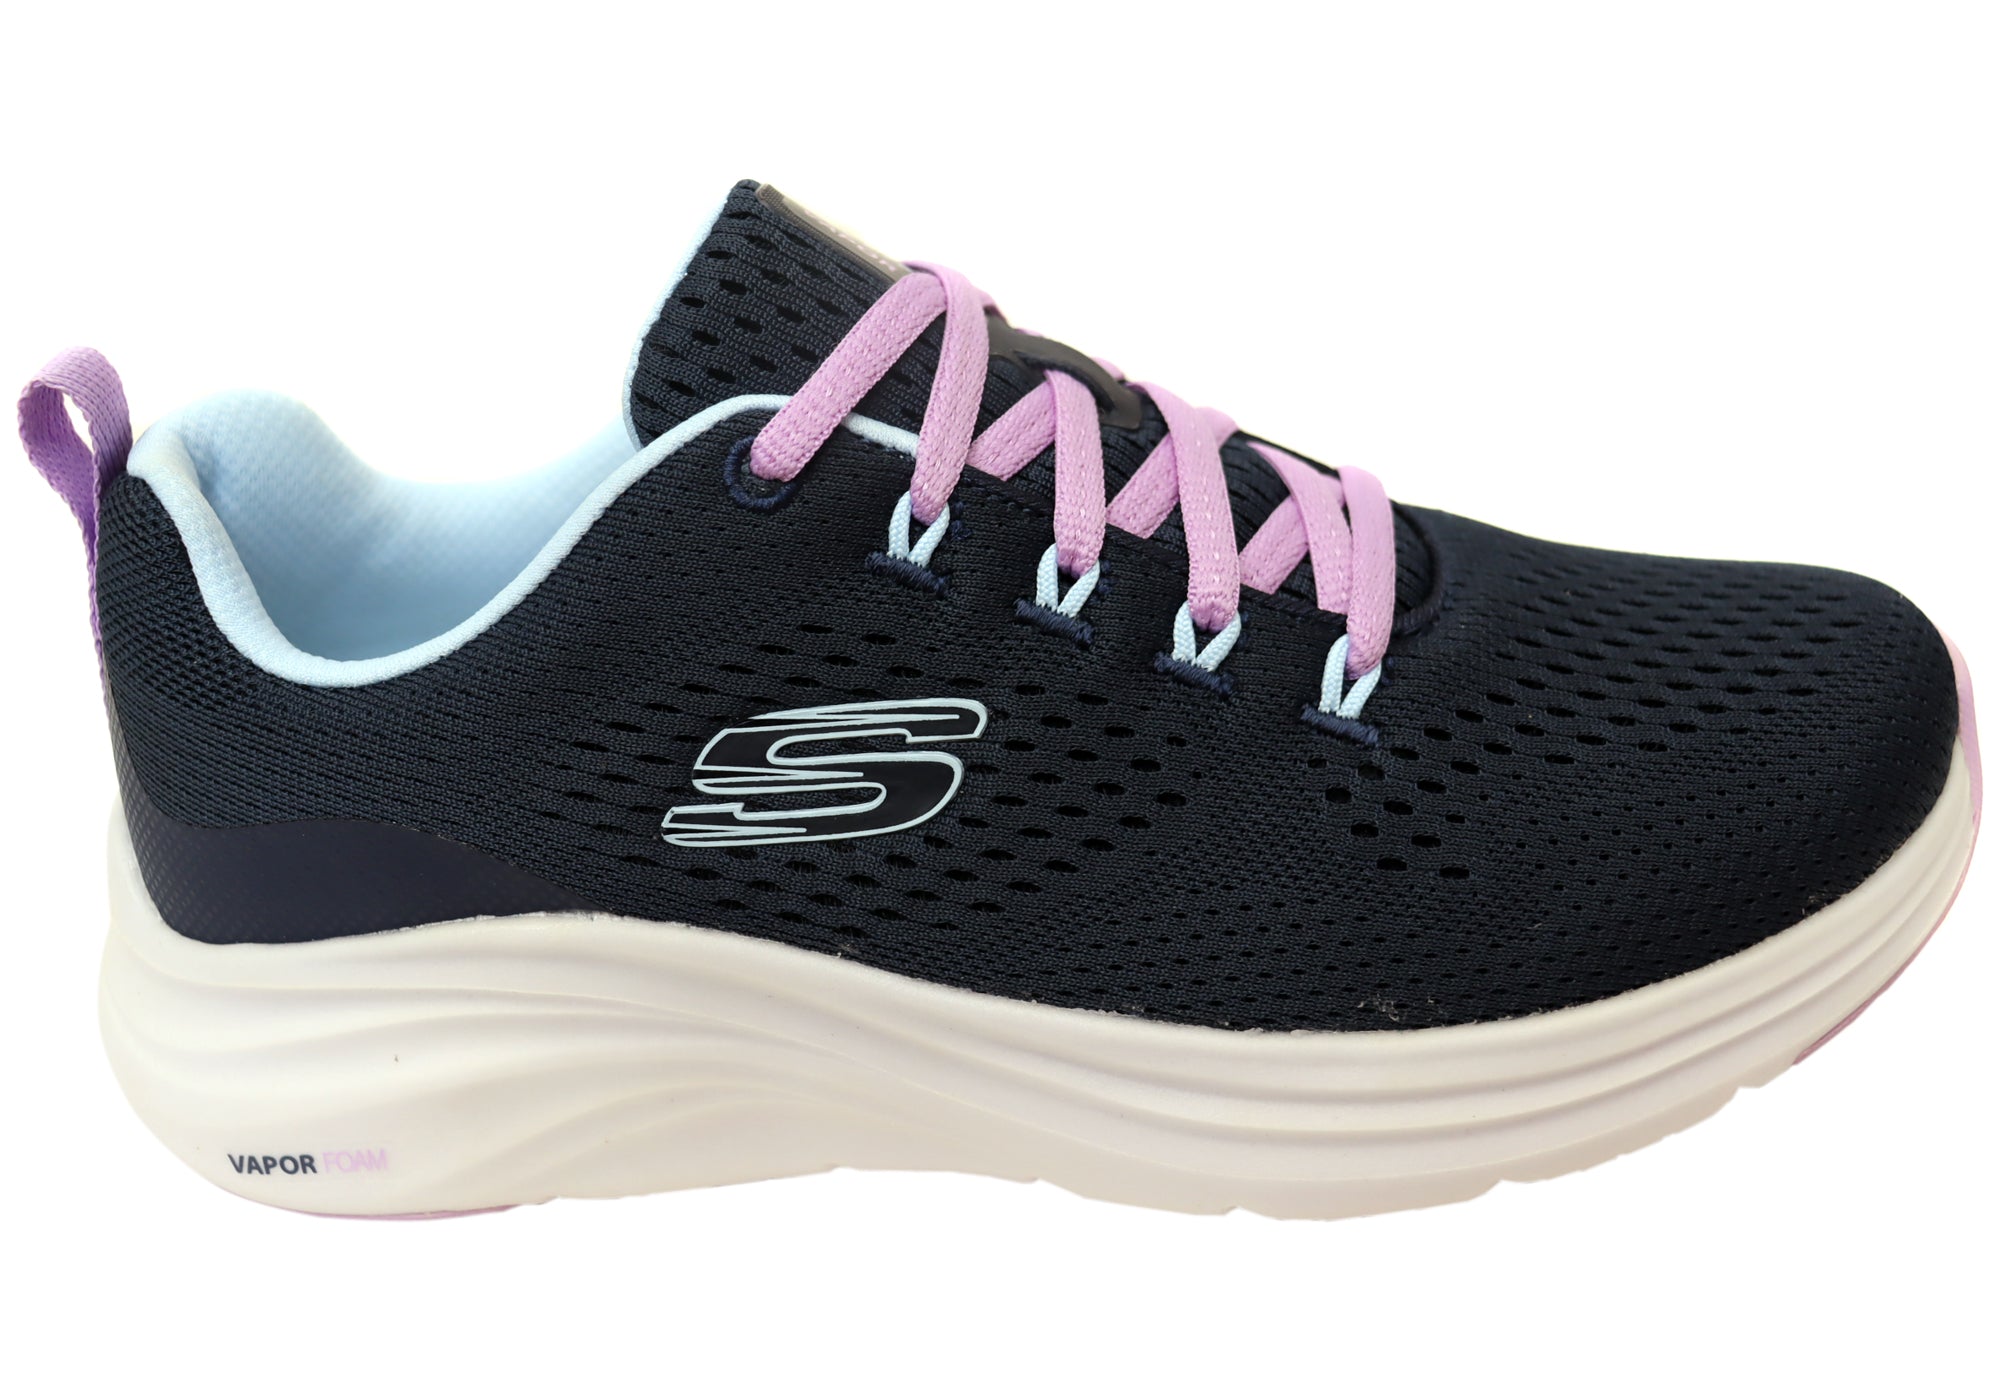 Shop Womens Athletic Shoes on Sale, Buy Cheap Womens Athletic Shoes ...